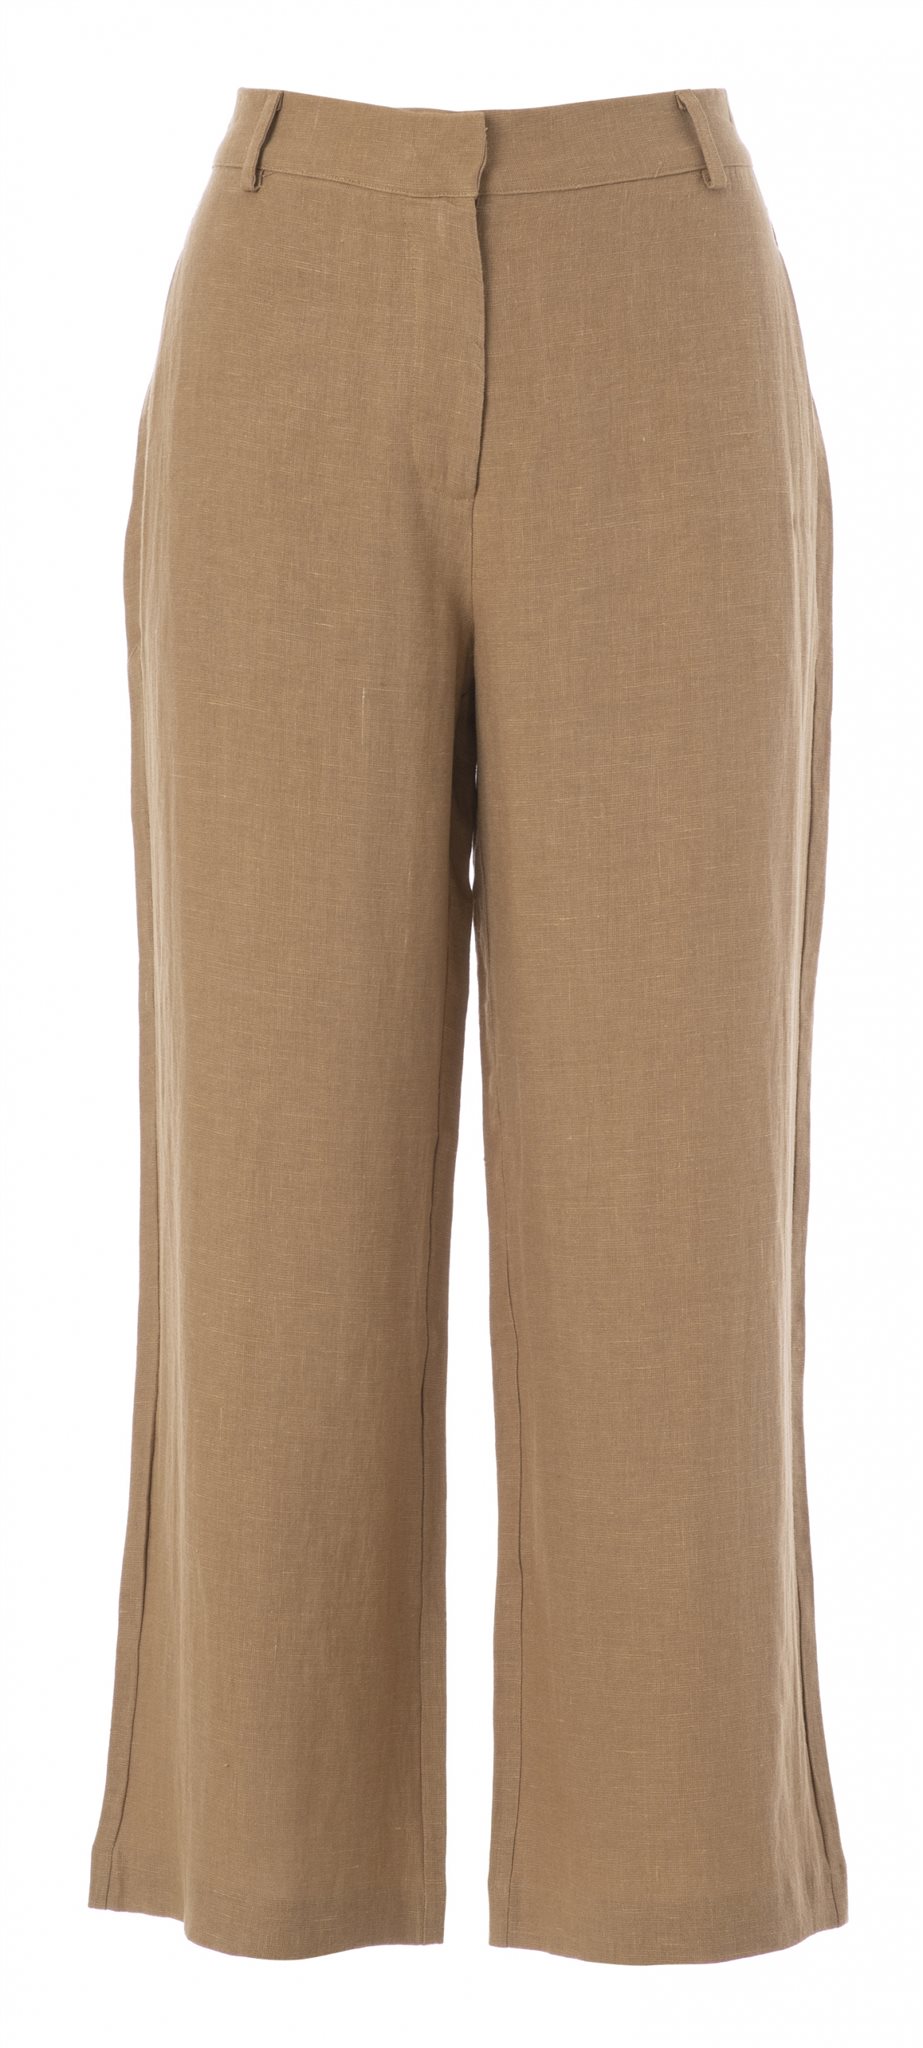 Charm trousers Jc SOPHIE